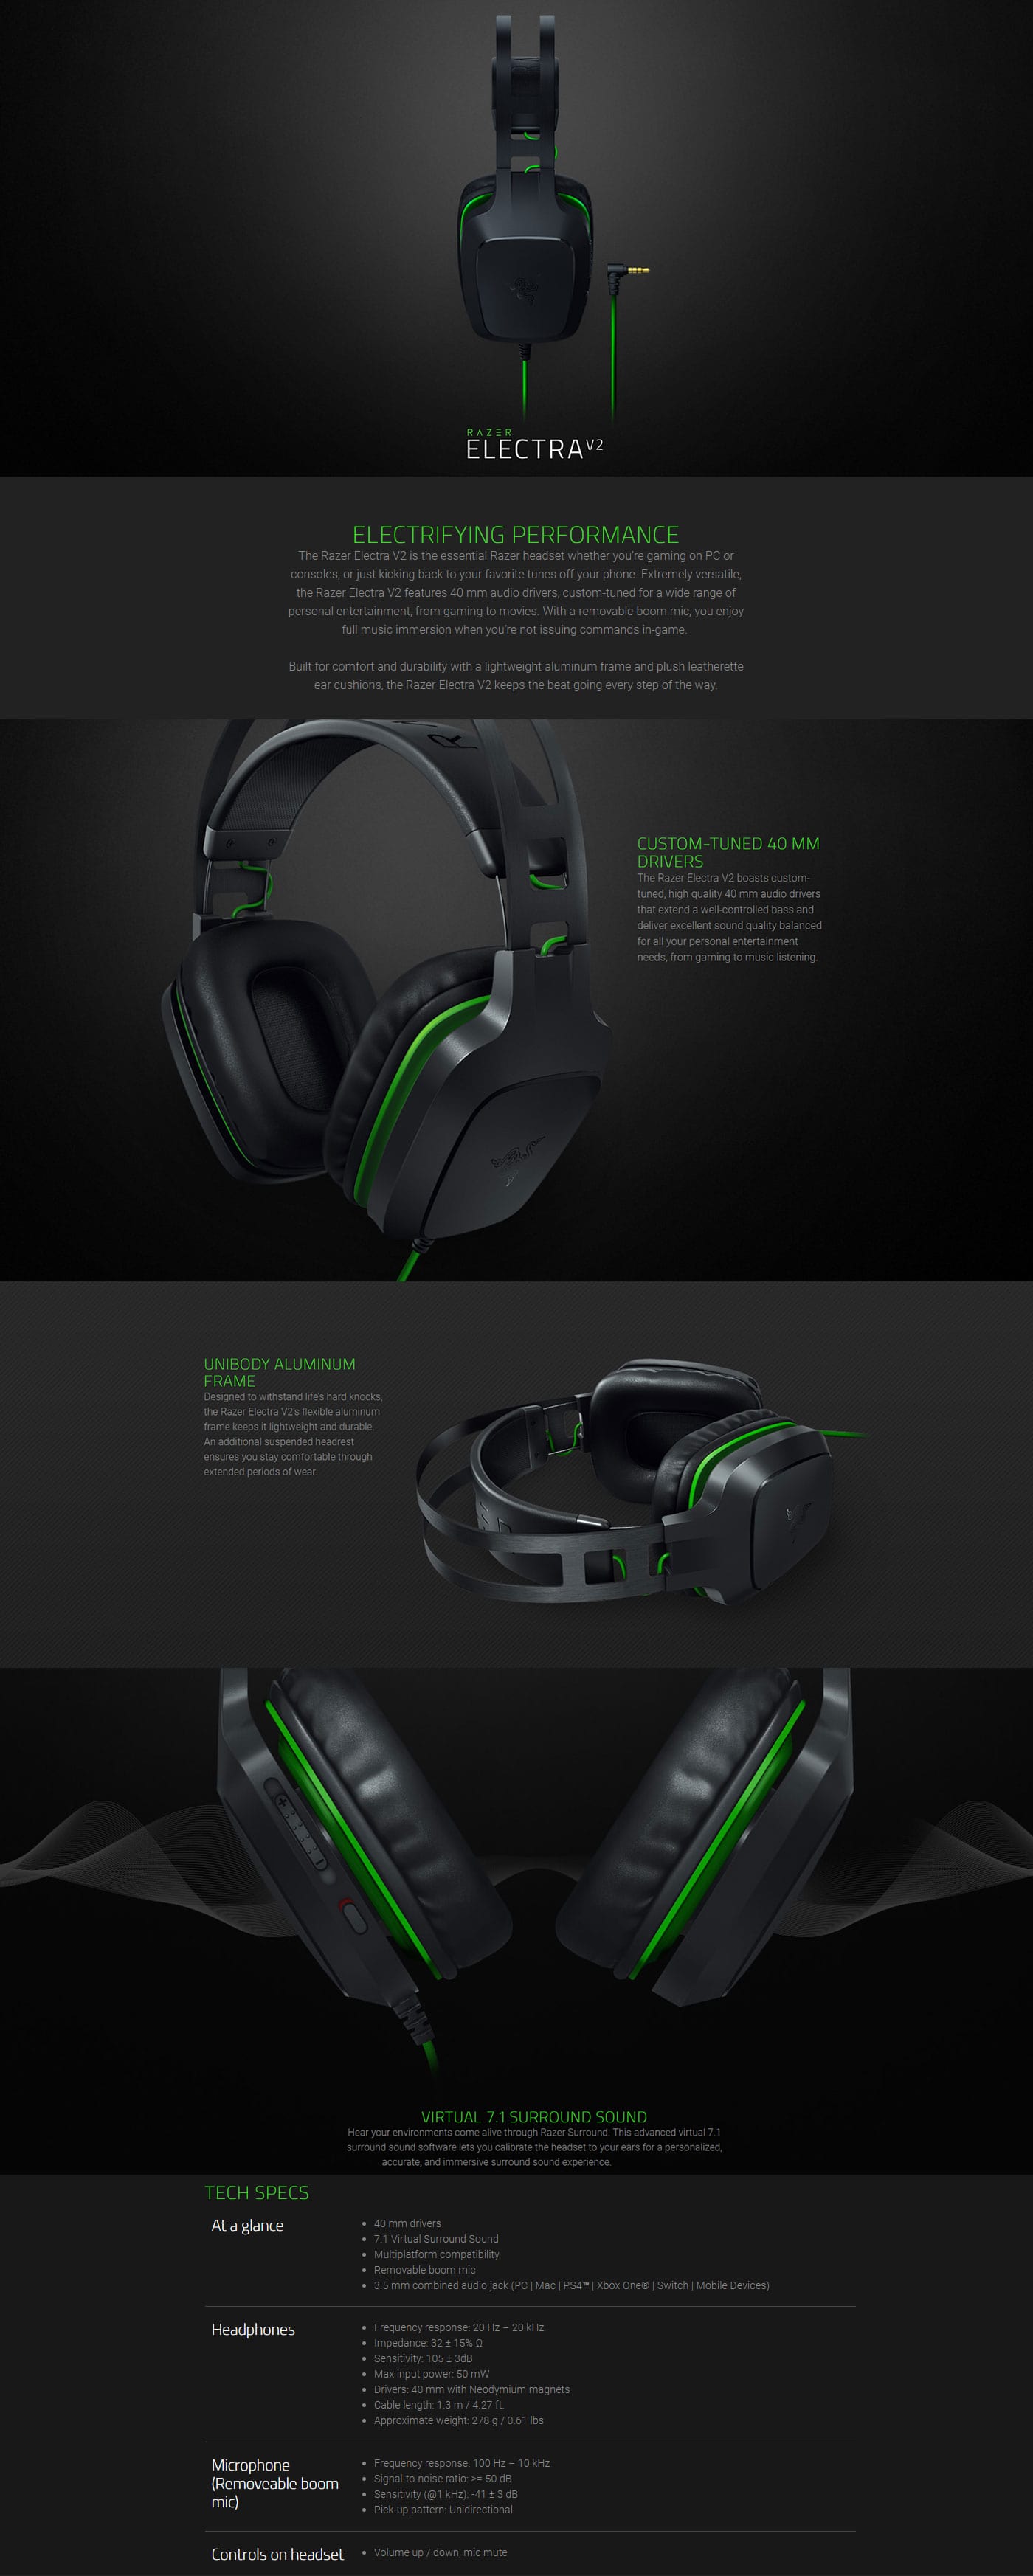 Razer Electra V2 Analog Gaming and Music Headset features